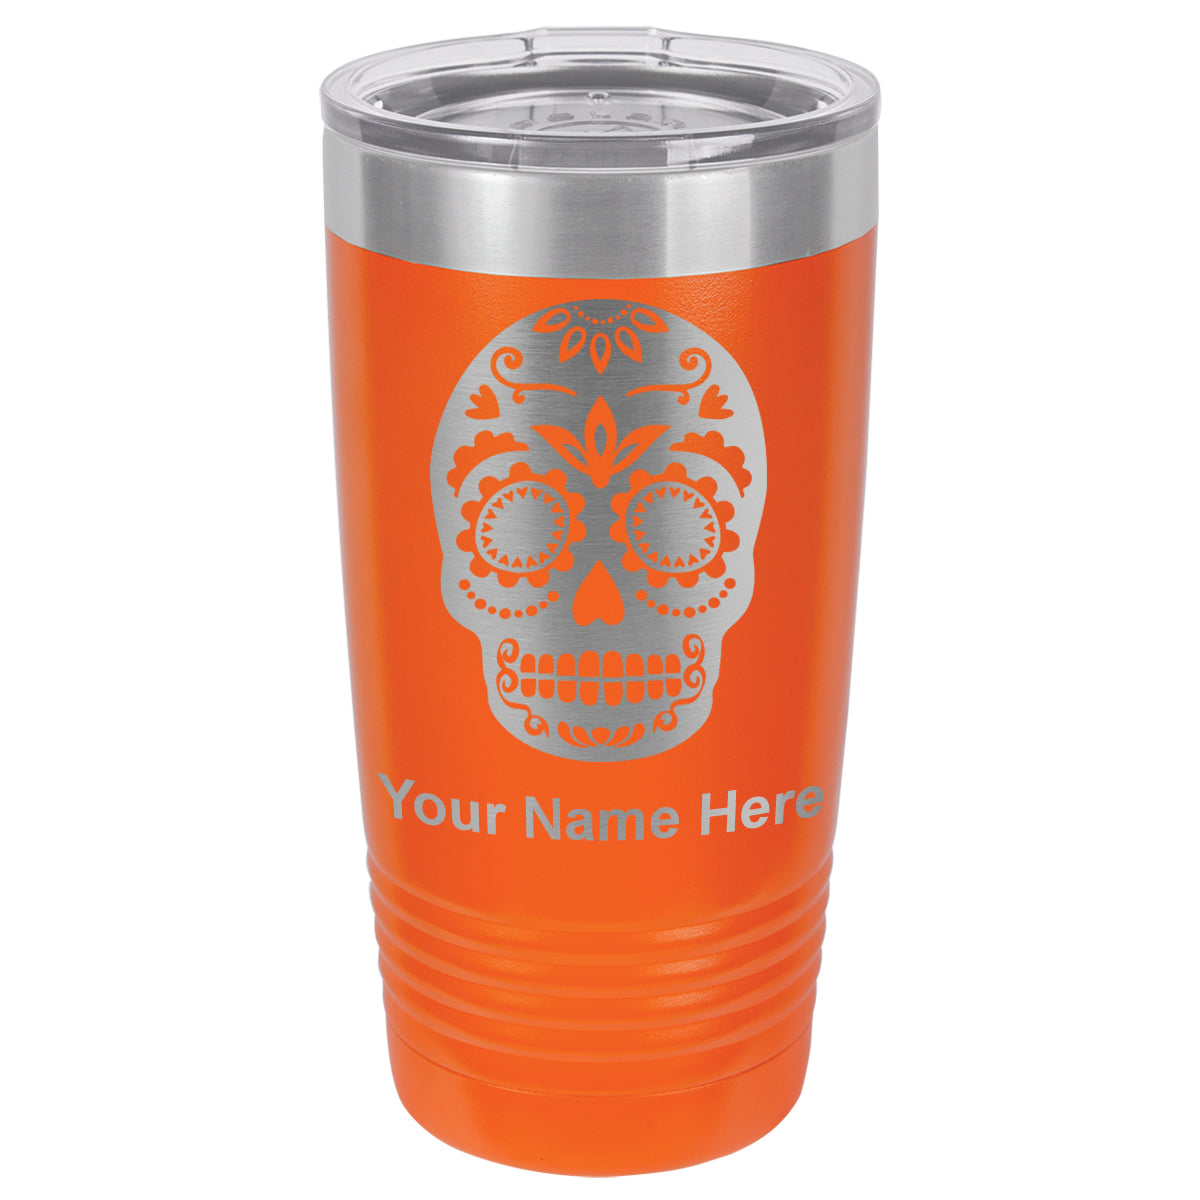 20oz Vacuum Insulated Tumbler Mug, Day of the Dead, Personalized Engraving Included